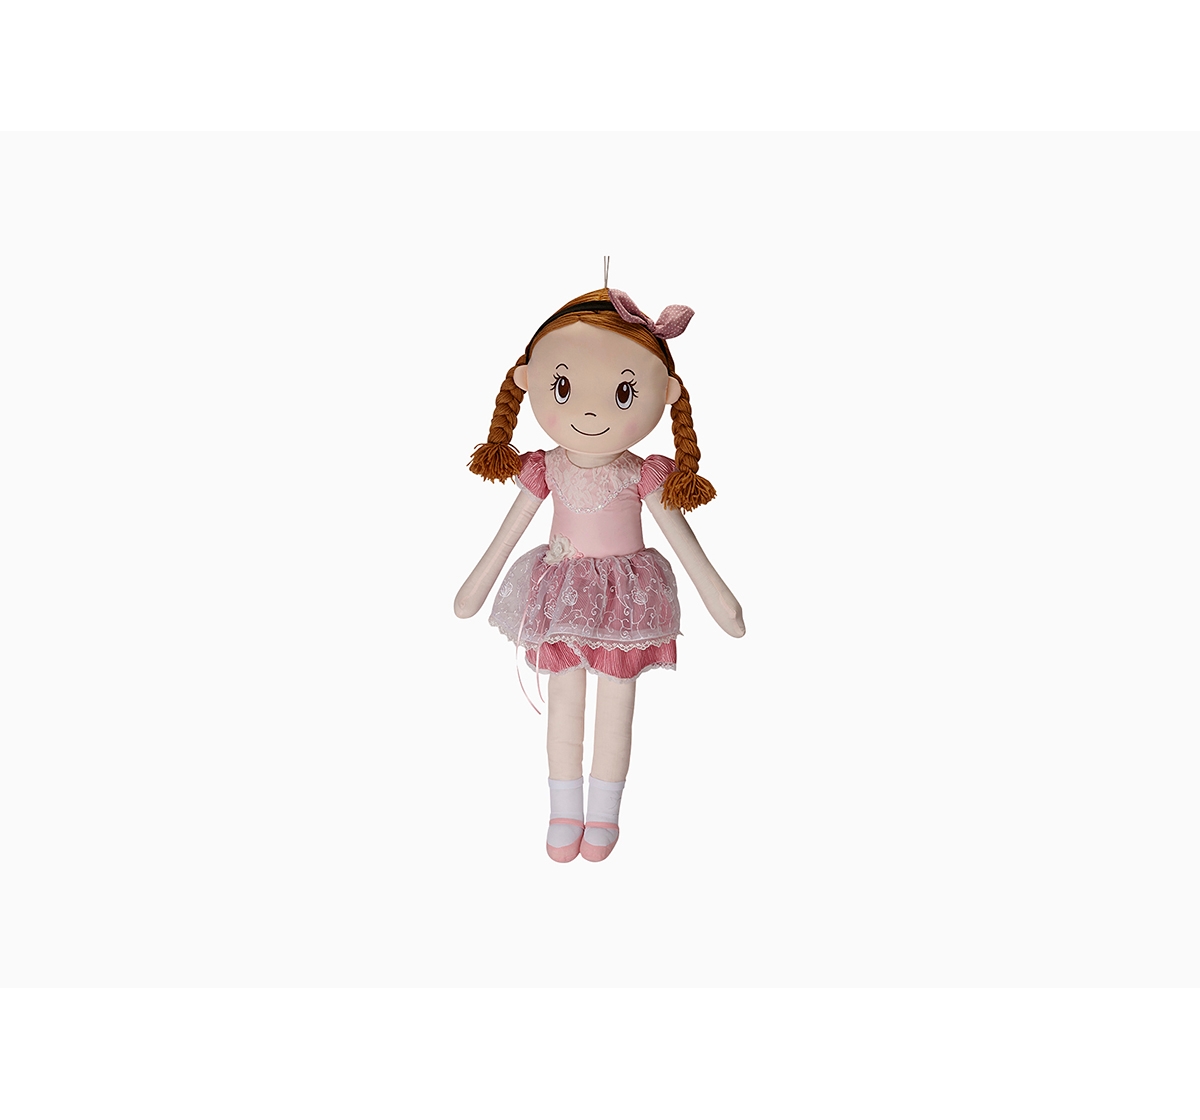 Fuzzbuzz | Fuzzbuzz Candy Dolls Dress Doll With Plaits Dolls & Puppets for Kids age 2Y+ - 85 Cm (Pink)